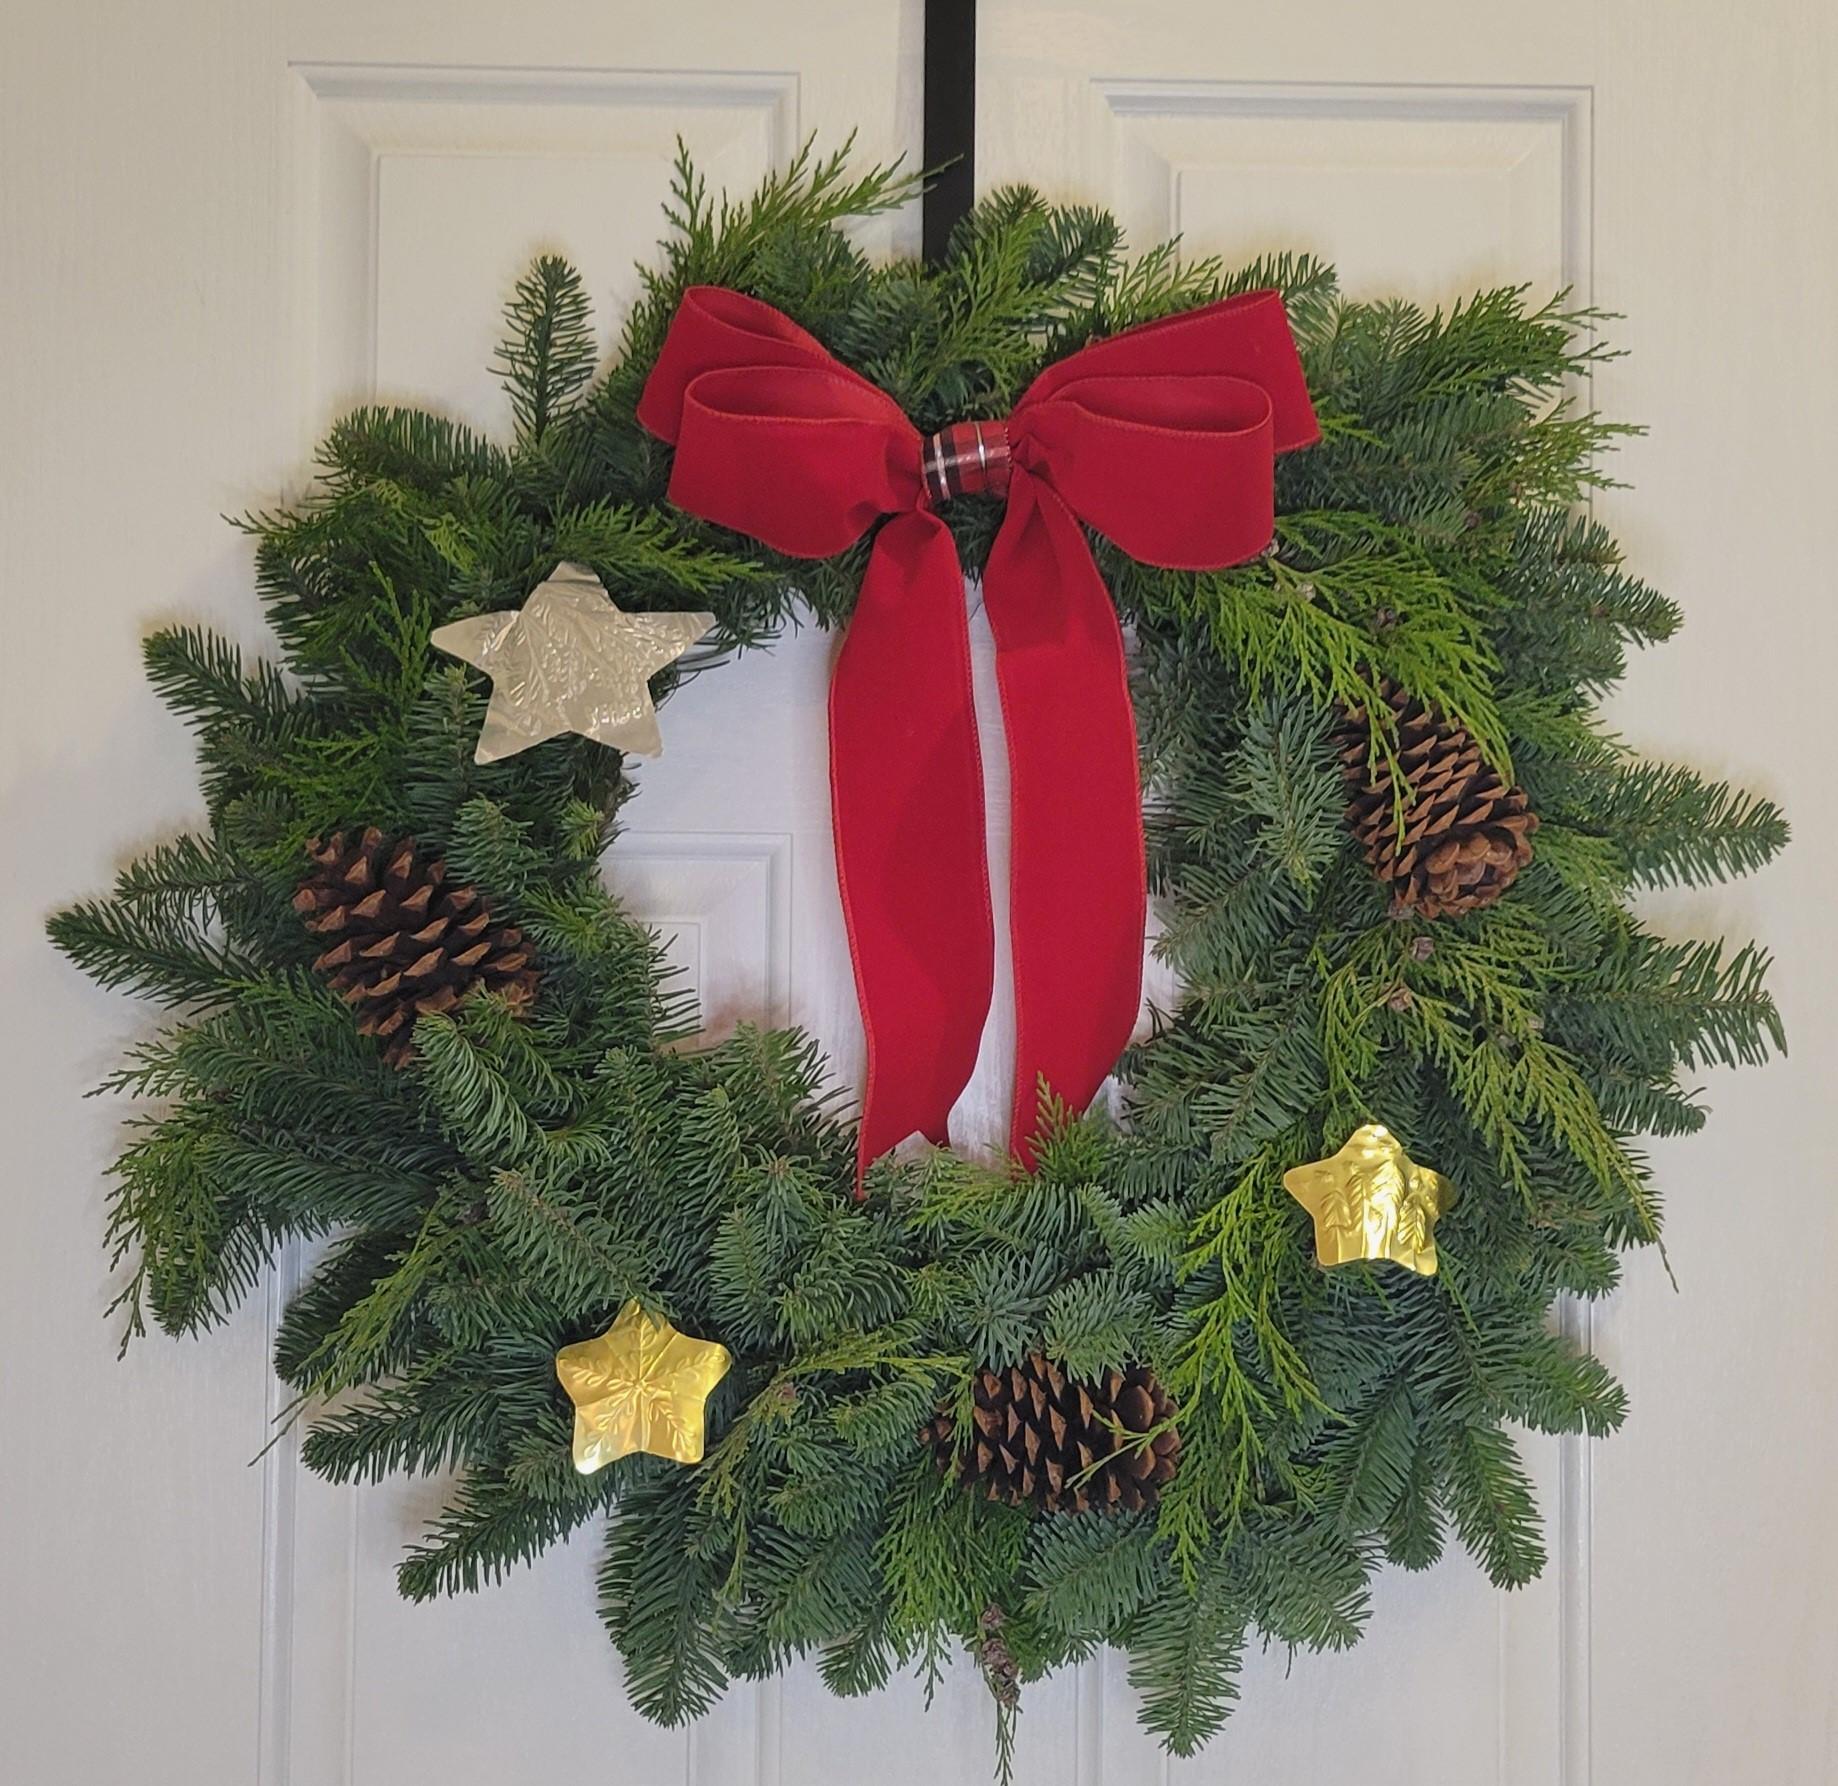 Wreath with red bow